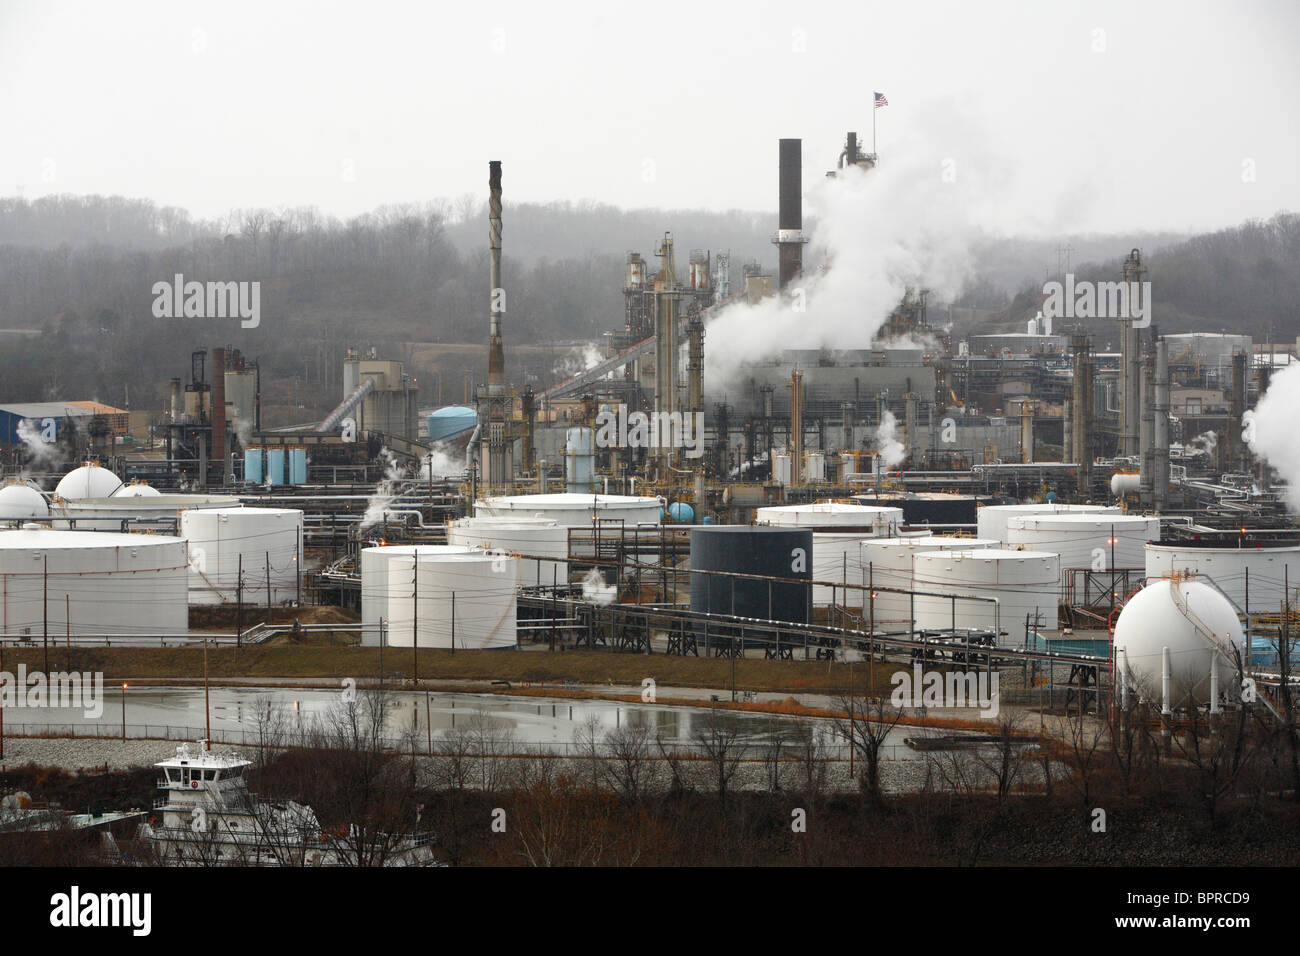 Oil refinery at Catlettsburg, KY. Stock Photo